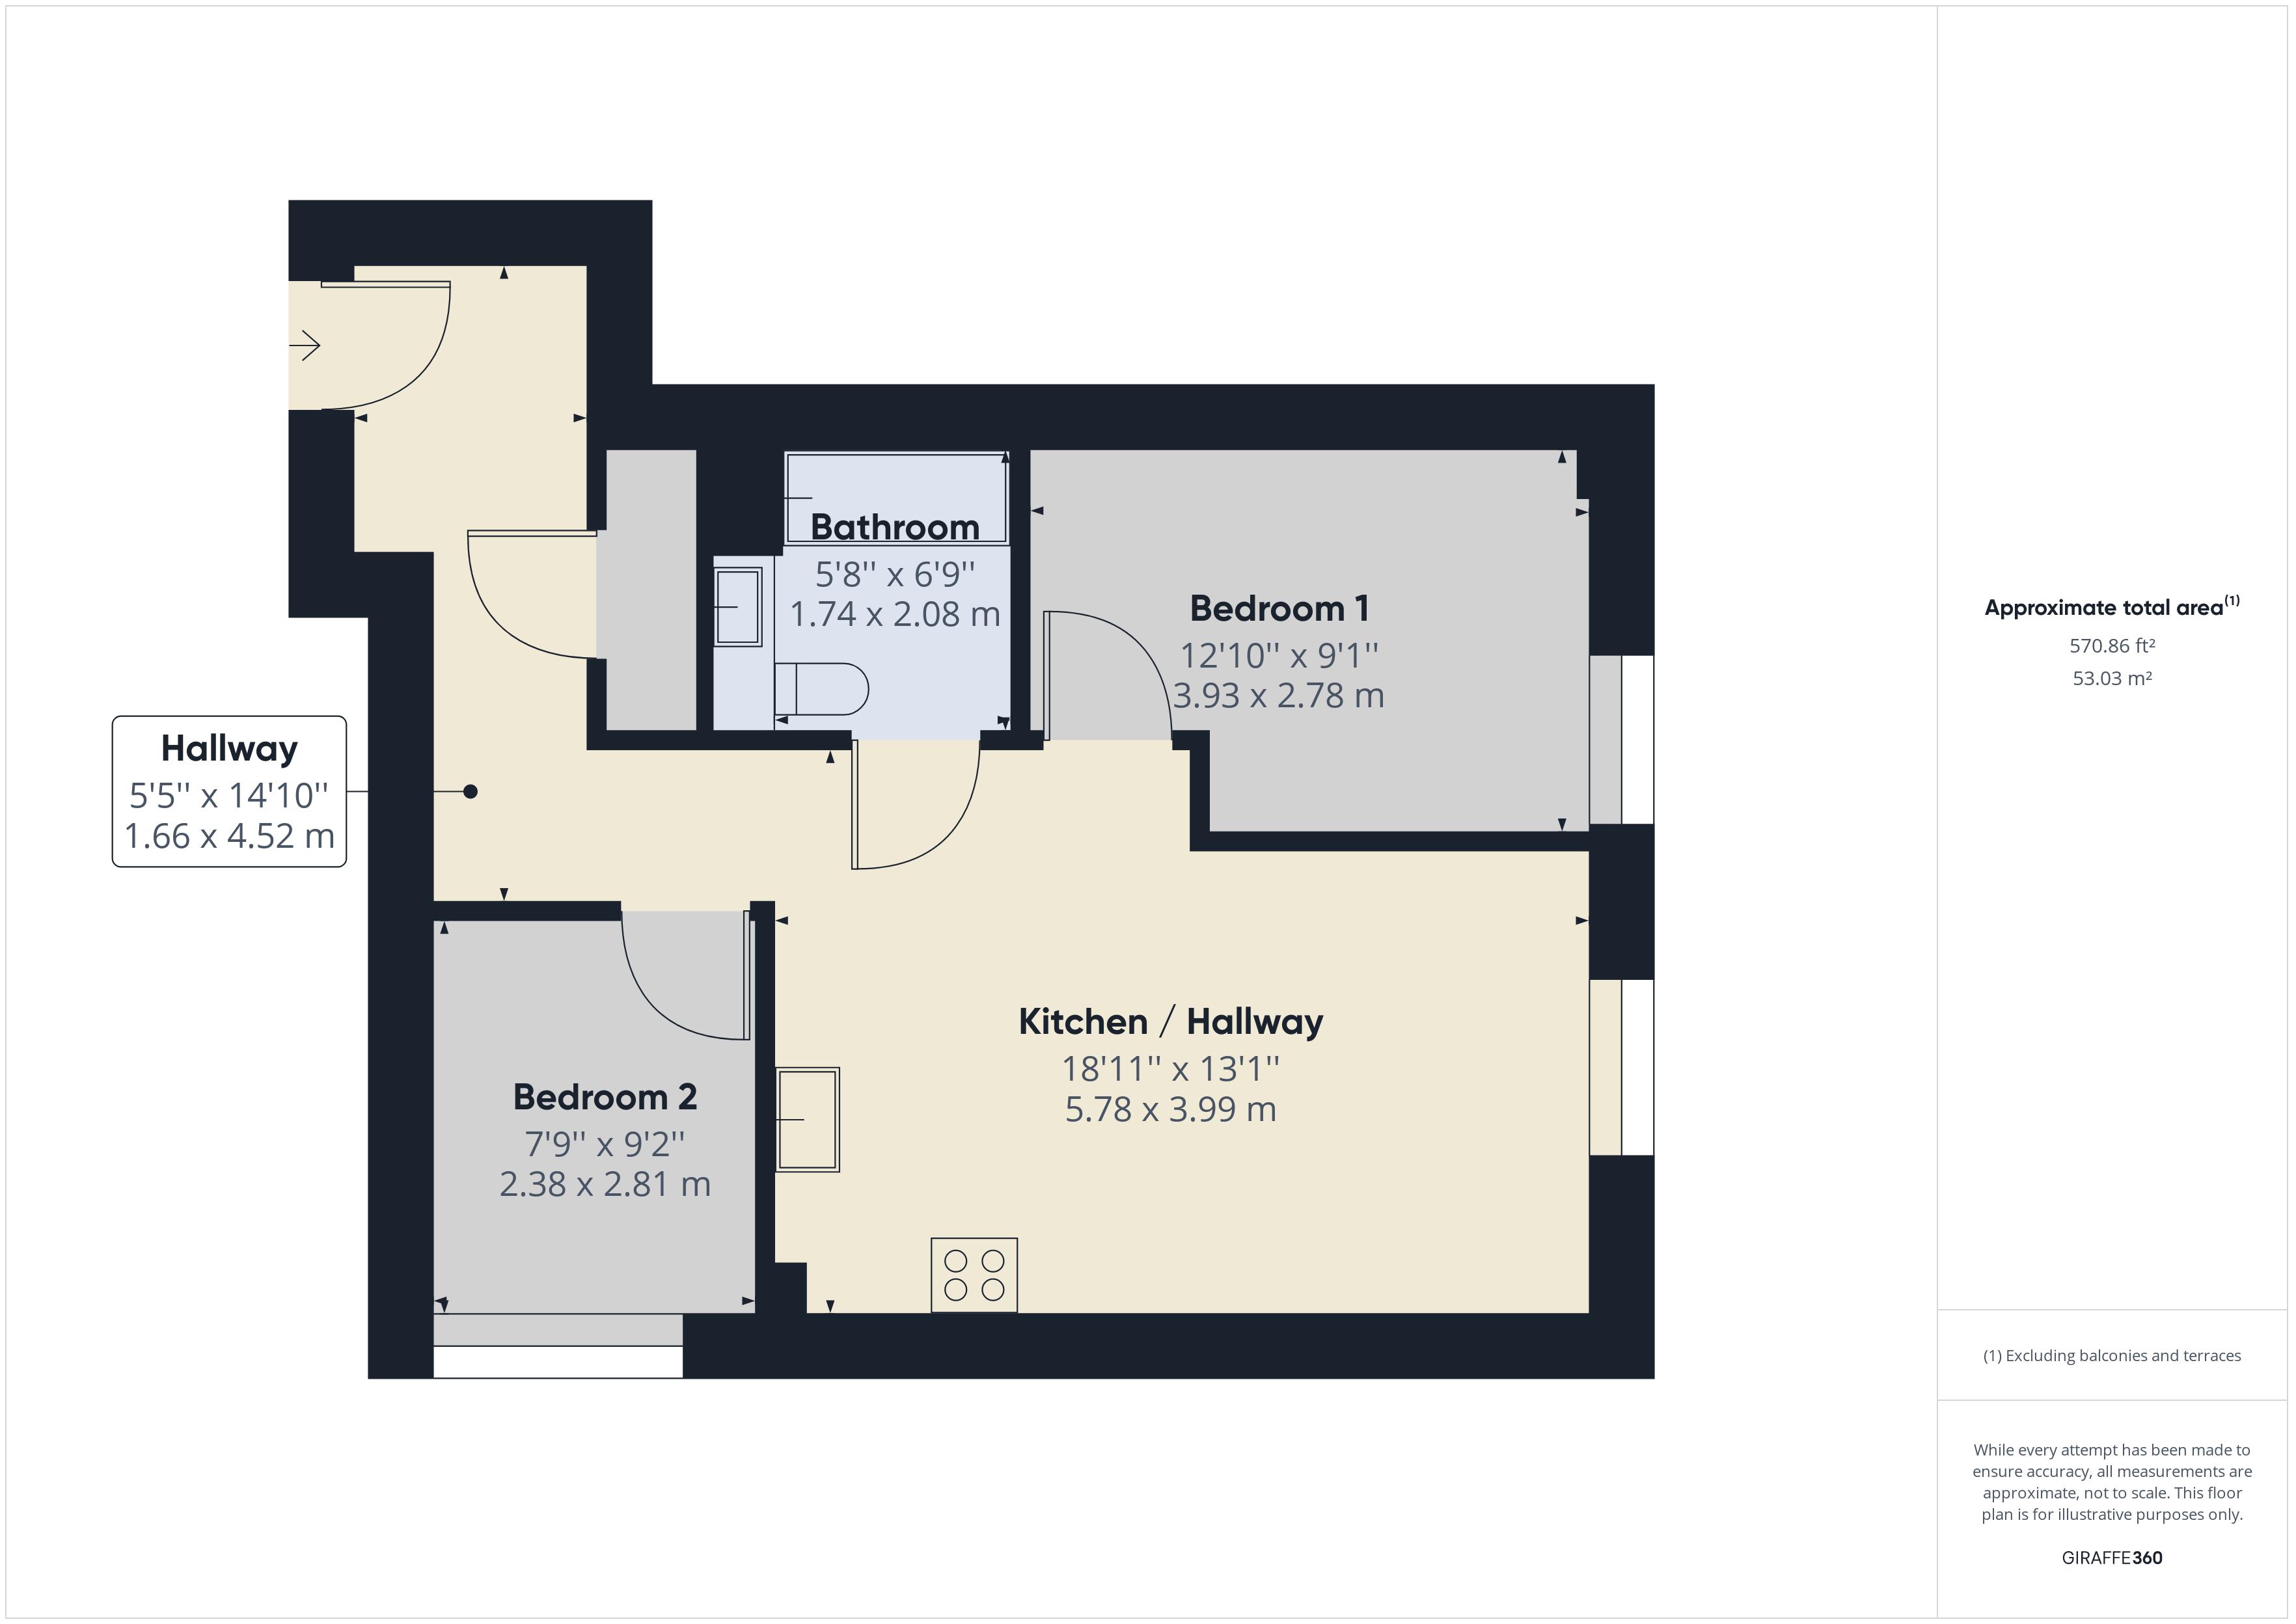 2 bed to rent in Chatham Maritime, Chatham - Property Floorplan